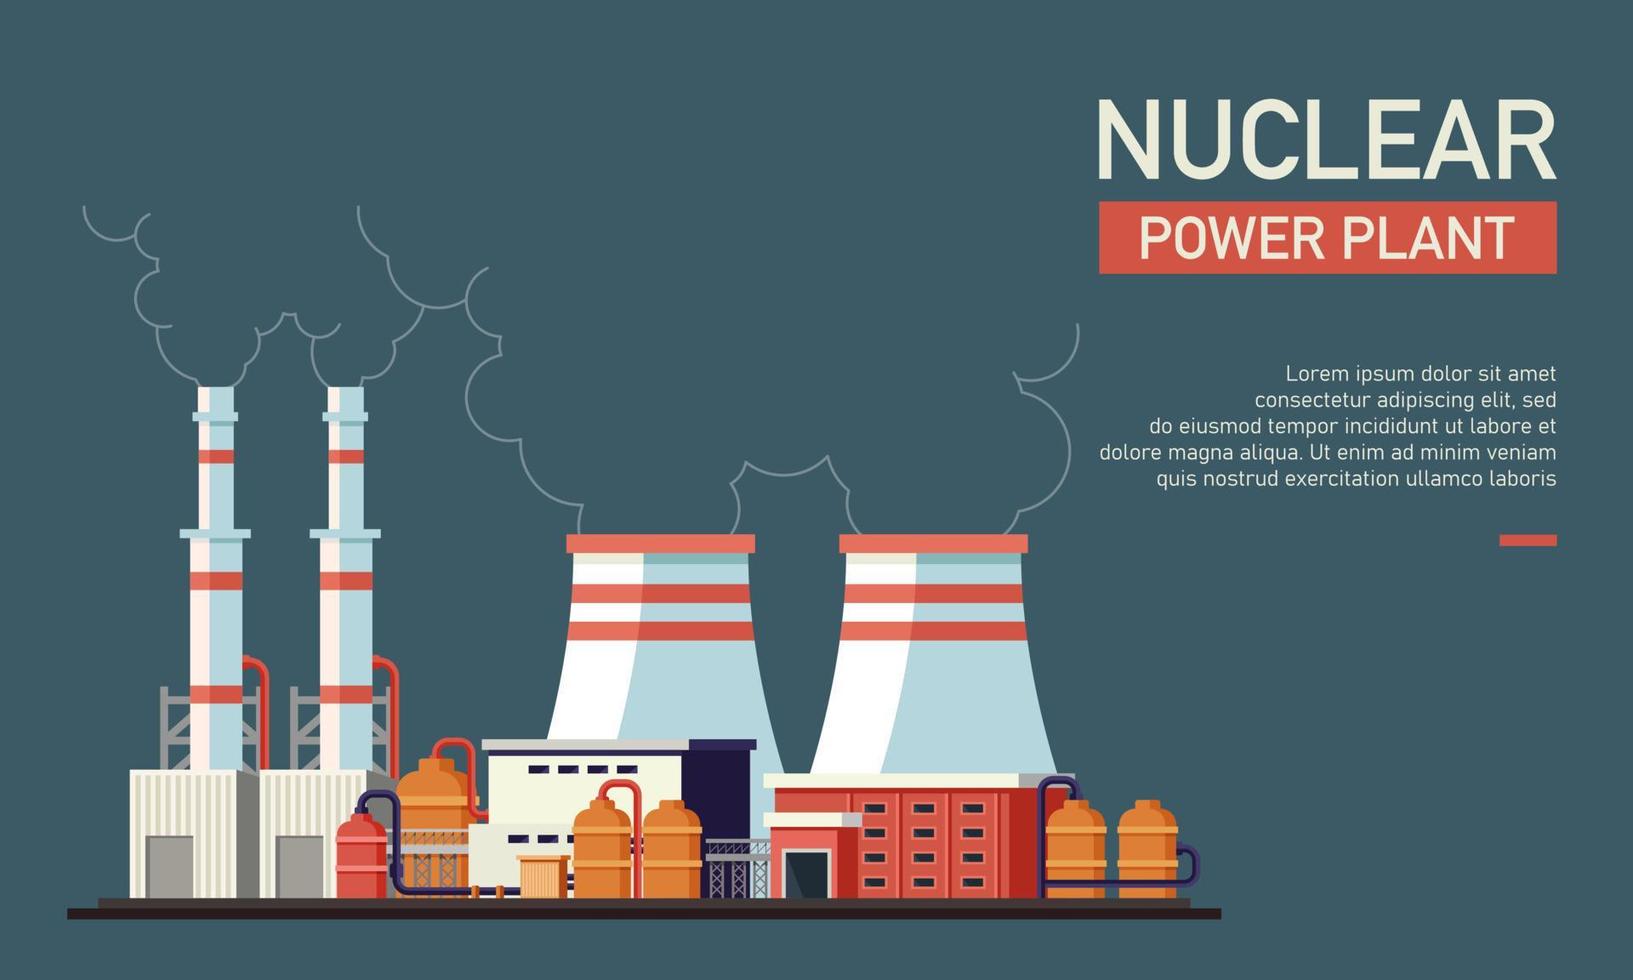 Flat vector illustration of nuclear power plant. Suitable for design element form nuclear company website background, eco friendly and renewable energy infographic.